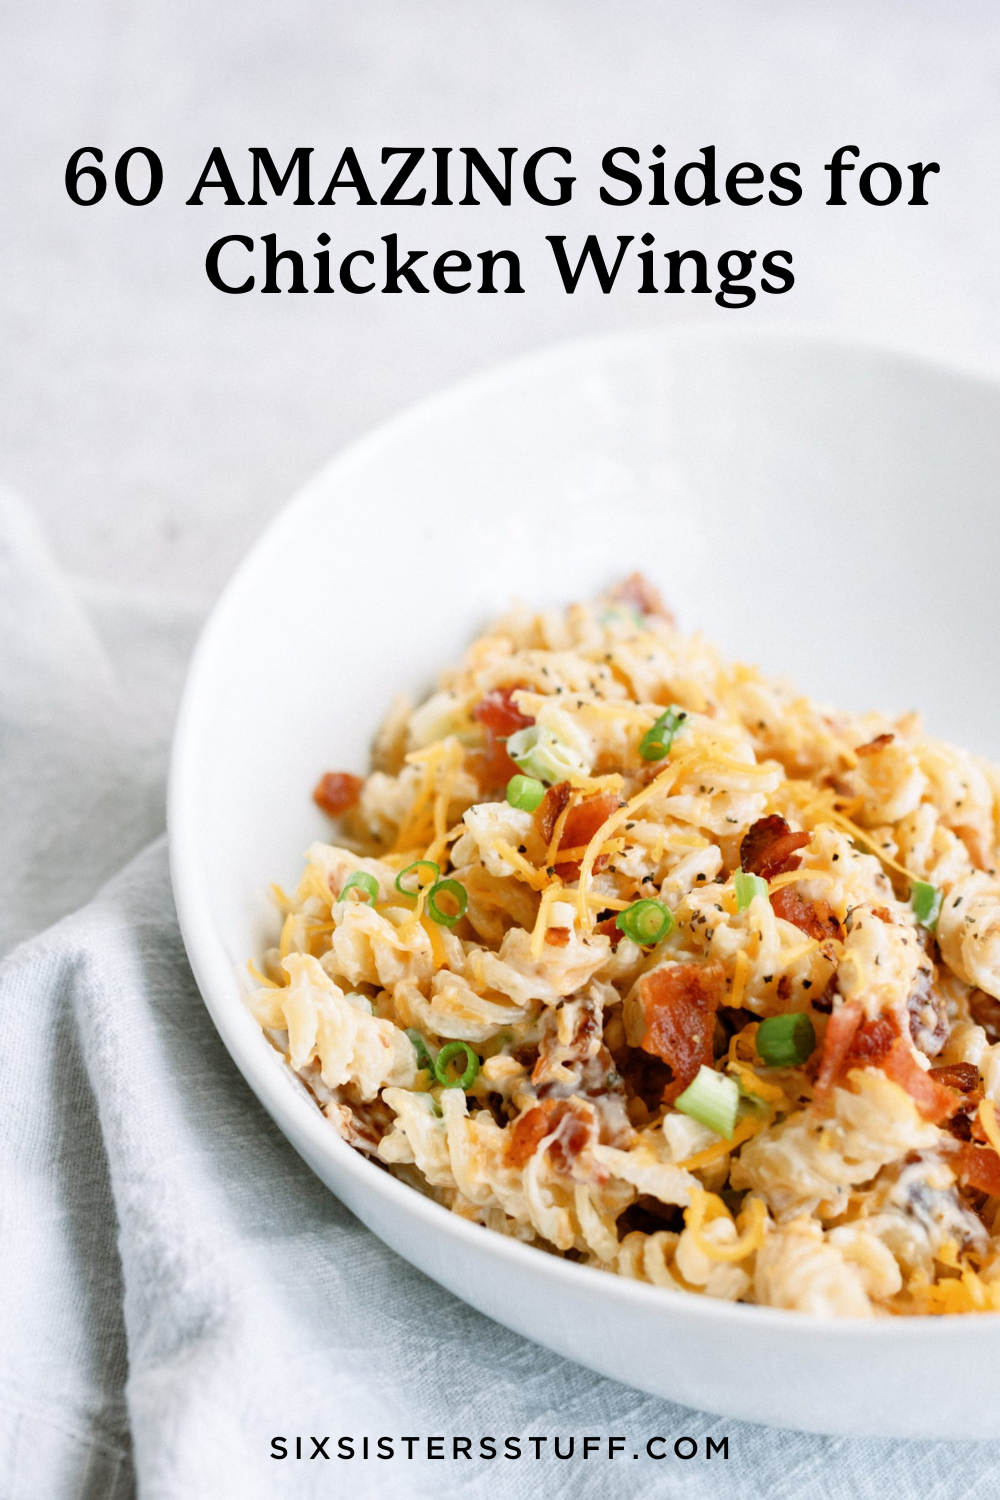 60 AMAZING Sides for Chicken Wings